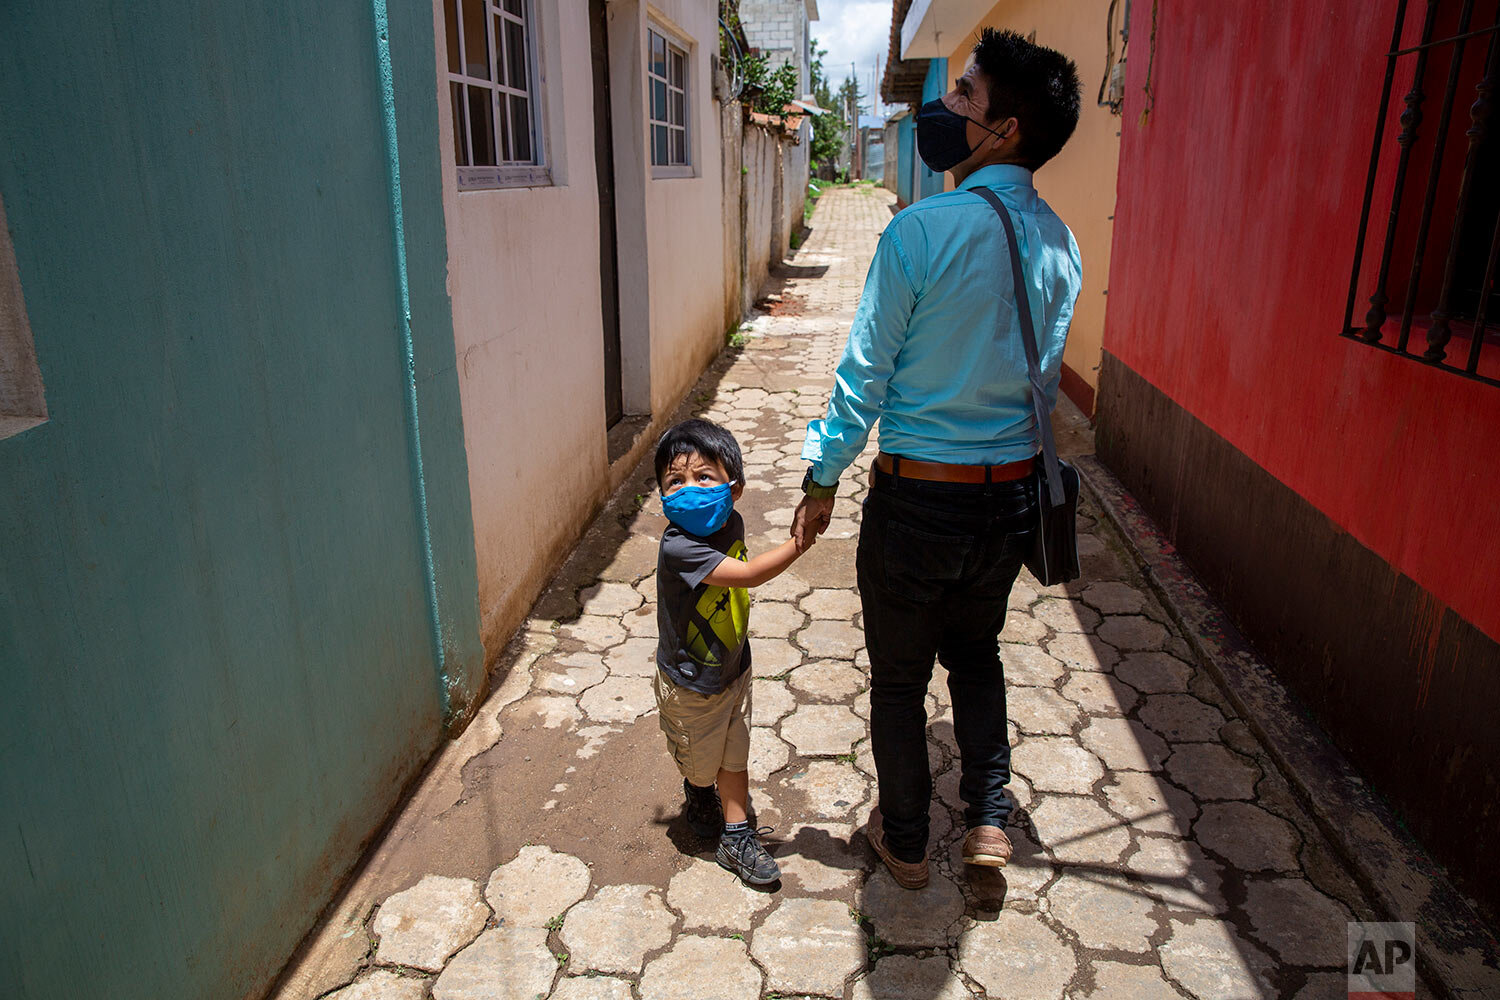  Teacher Gerardo Ixcoy and his three-year-old son Dylan greet a neighbor as Ixcoy arrives home after a day of giving individual instruction to his sixth-grade students, in Santa Cruz del Quiche, Guatemala, Wednesday, July 15, 2020. By afternoon Ixcoy